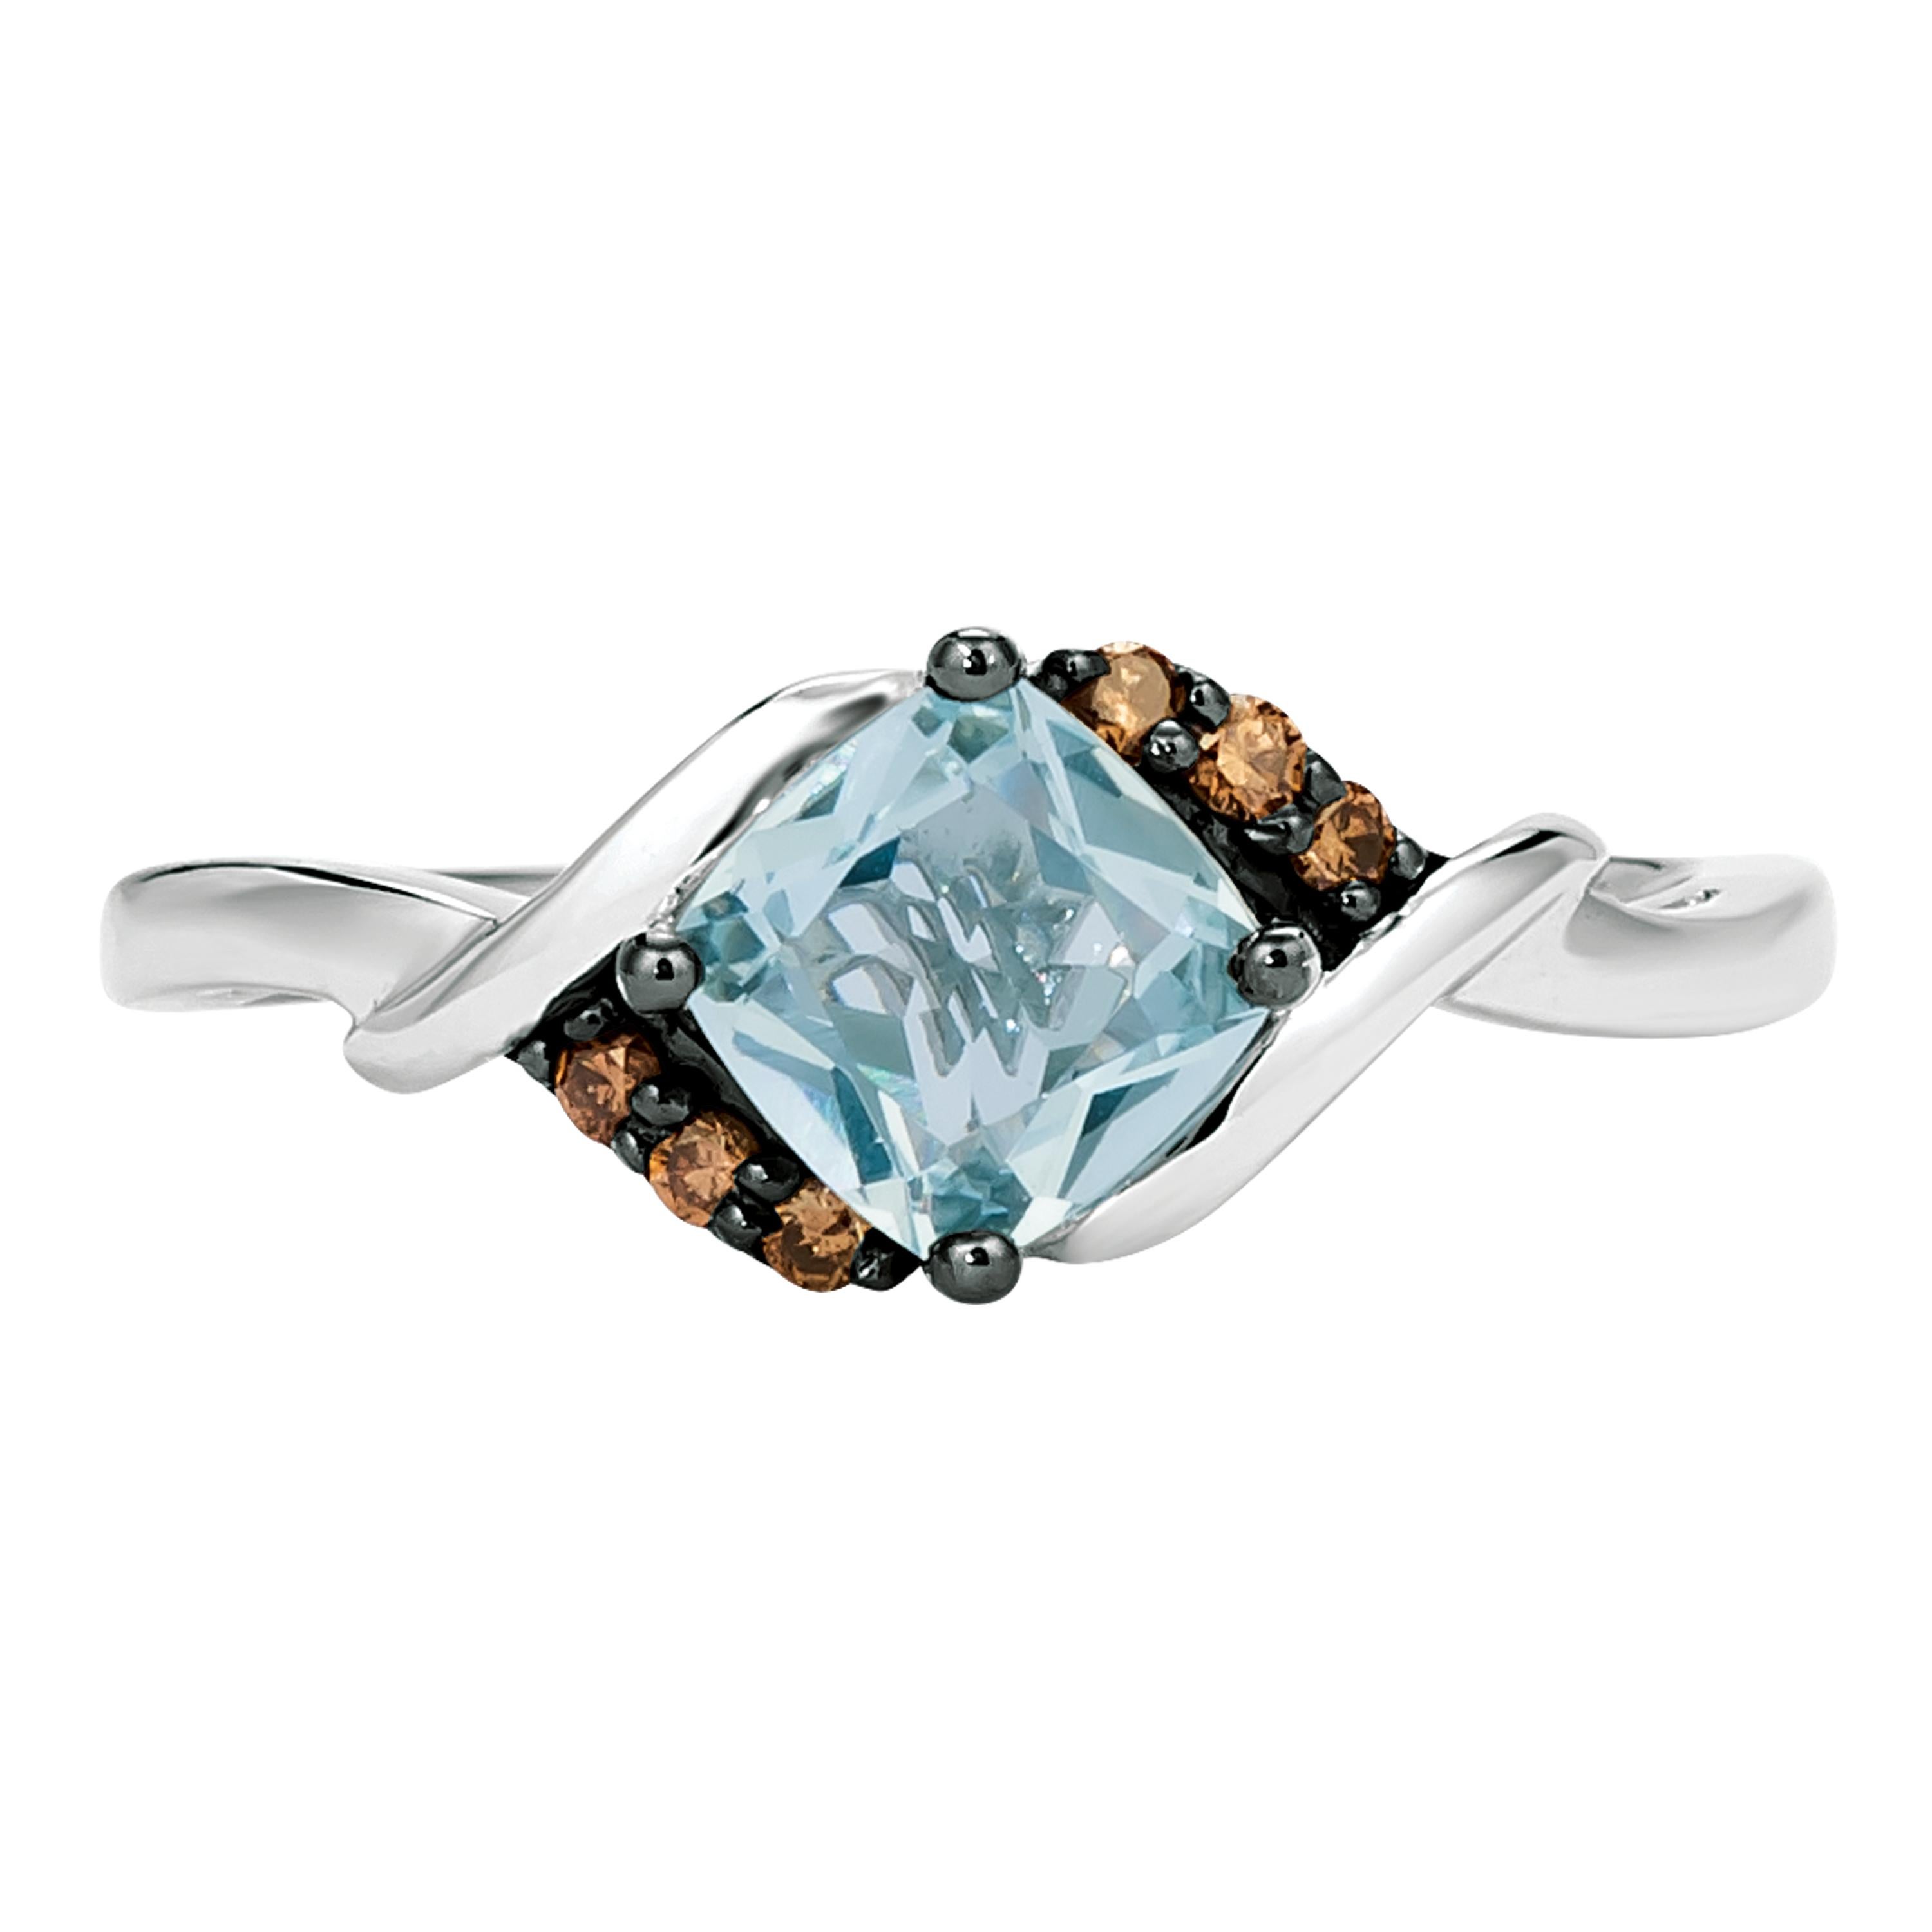 This gorgeous ring features a central square shaped, cushion-cut colorful gemstone in your choice of Sea Blue Aquamarine or Neon Tangerine Fire Opal, flanked by twin rows of sparkling Chocolate Diamonds all set in 14K Vanilla Gold or 14K Honey Gold